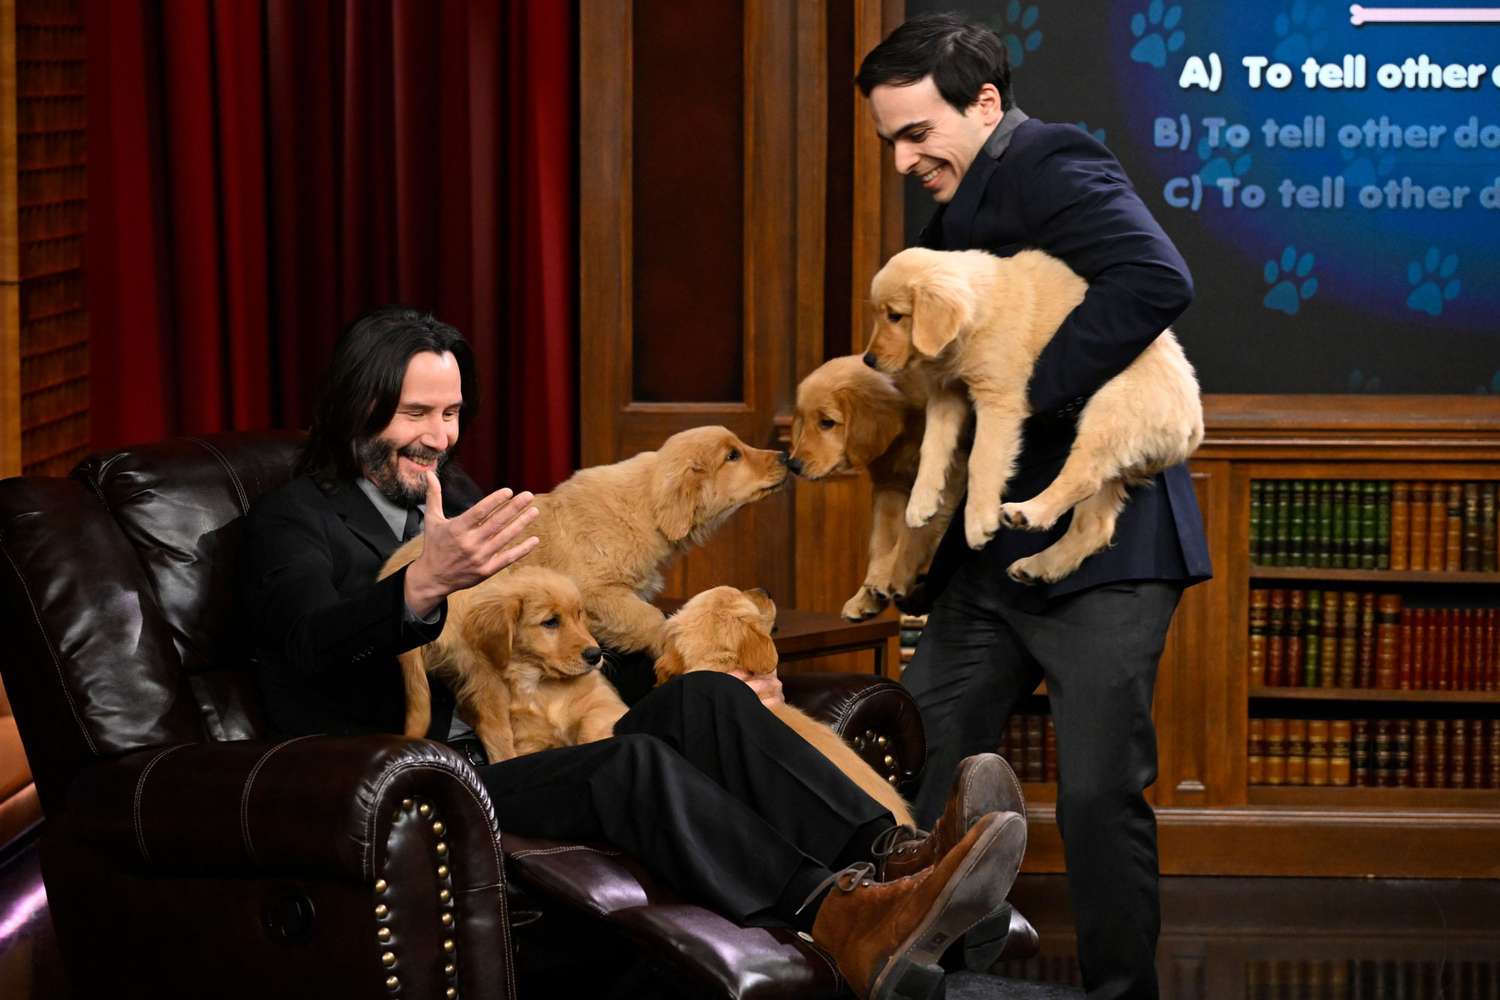 THE TONIGHT SHOW STARRING JIMMY FALLON -- Episode 1816 -- Pictured: Actor Keanu Reeves during Pup Quiz on Thursday, March 16, 2023 -- (Photo by: Todd Owyoung/NBC via Getty Images)